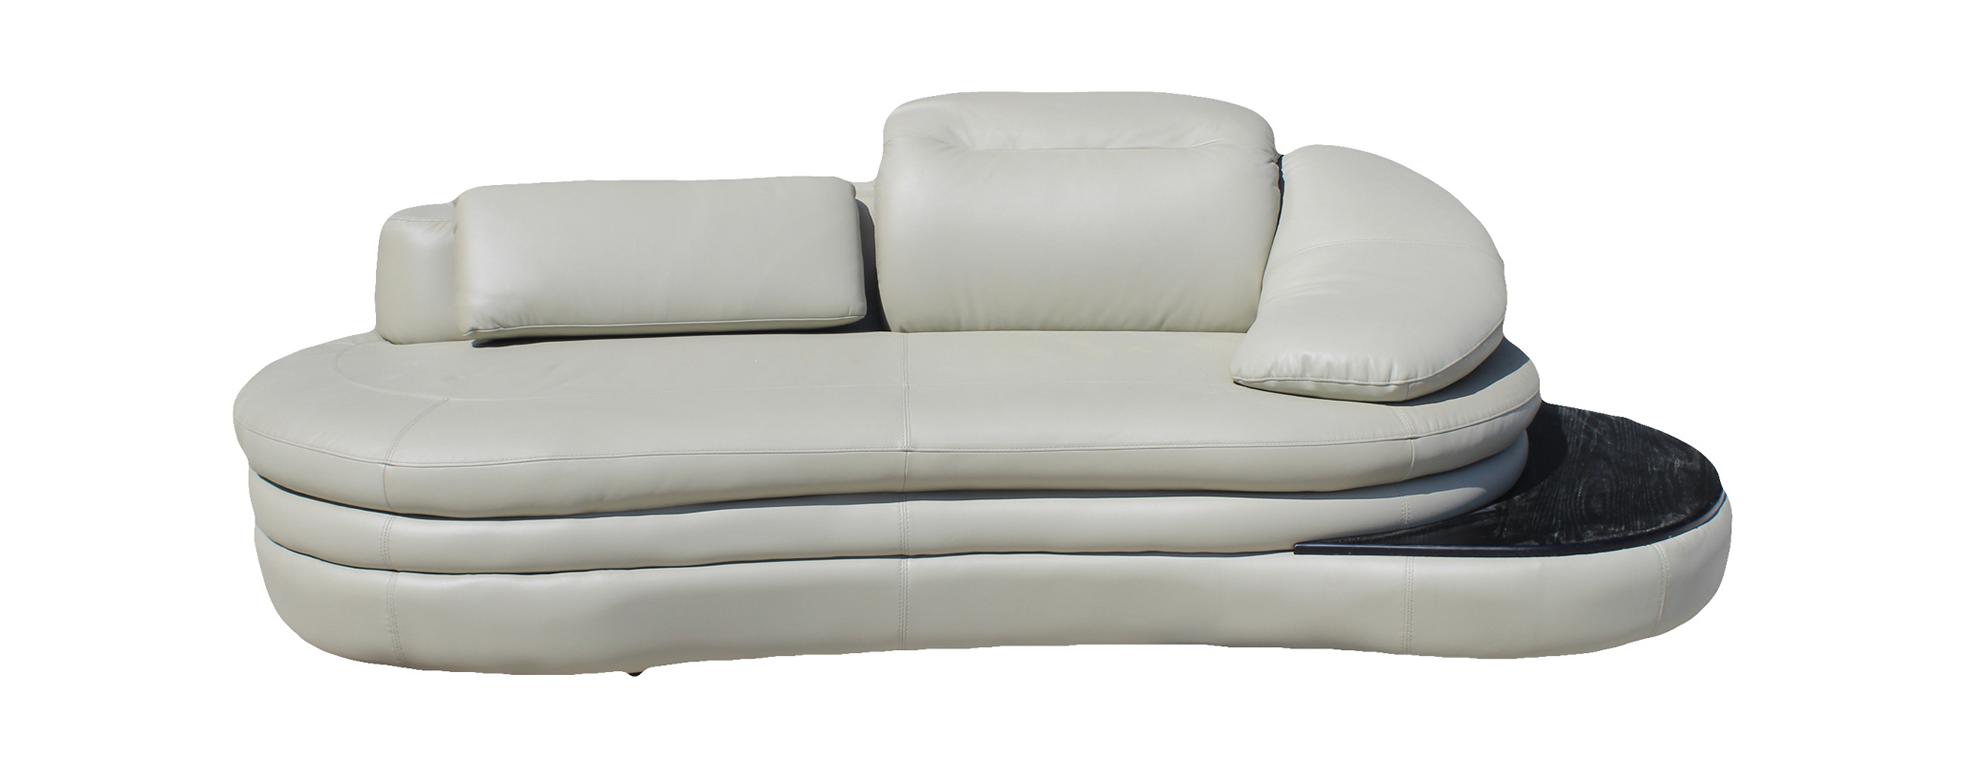 Chaiselounge Liege Chaise Wohnzimmer Couch Sofa Lounge Sounnd MP3 Möbel Sofort